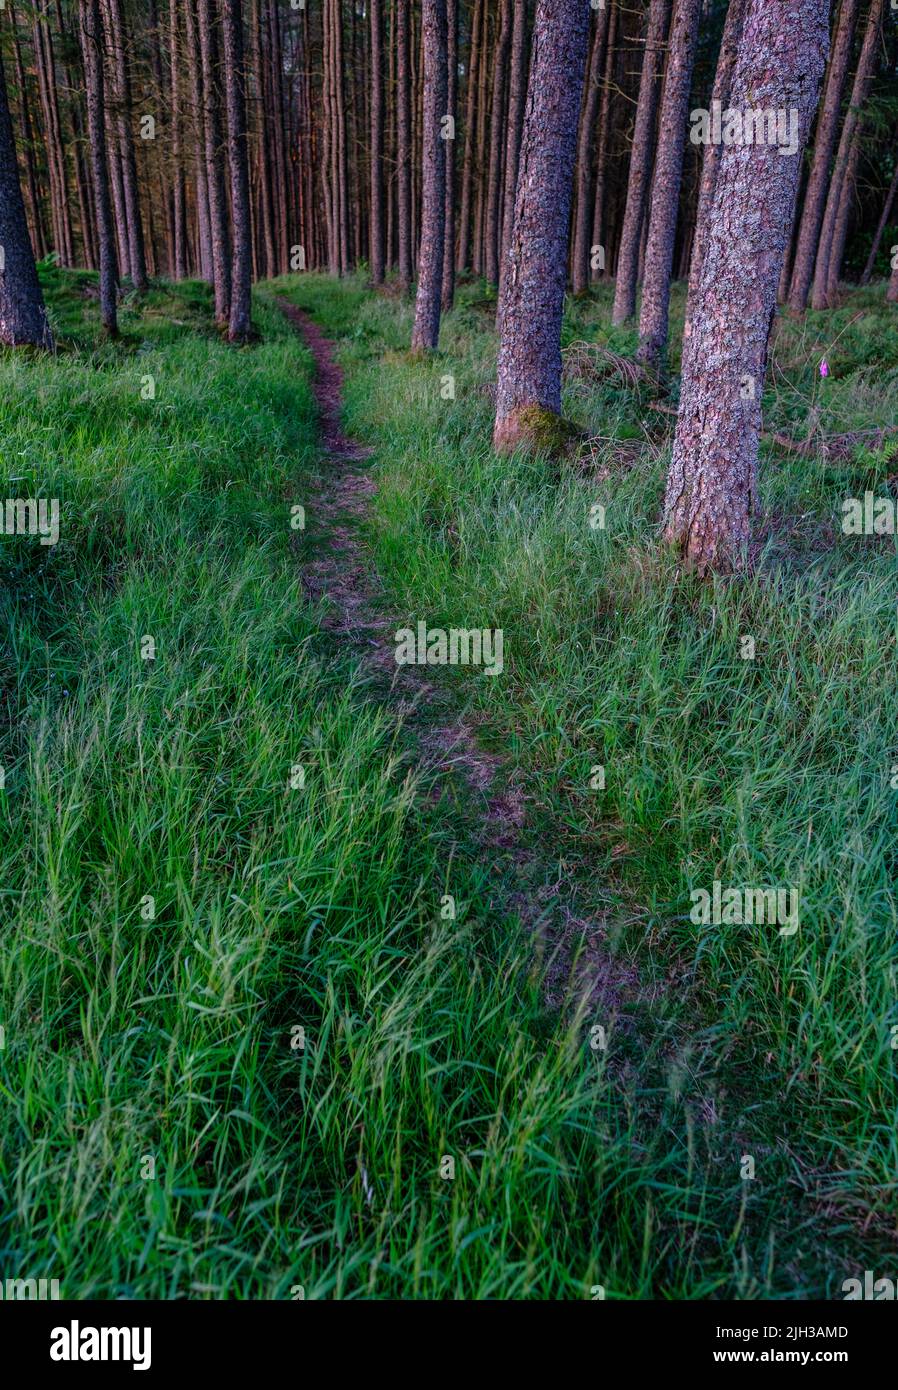 Conceptual Image Of The Unknown, With A Woodland Trail Leading Into The Distance Stock Photo